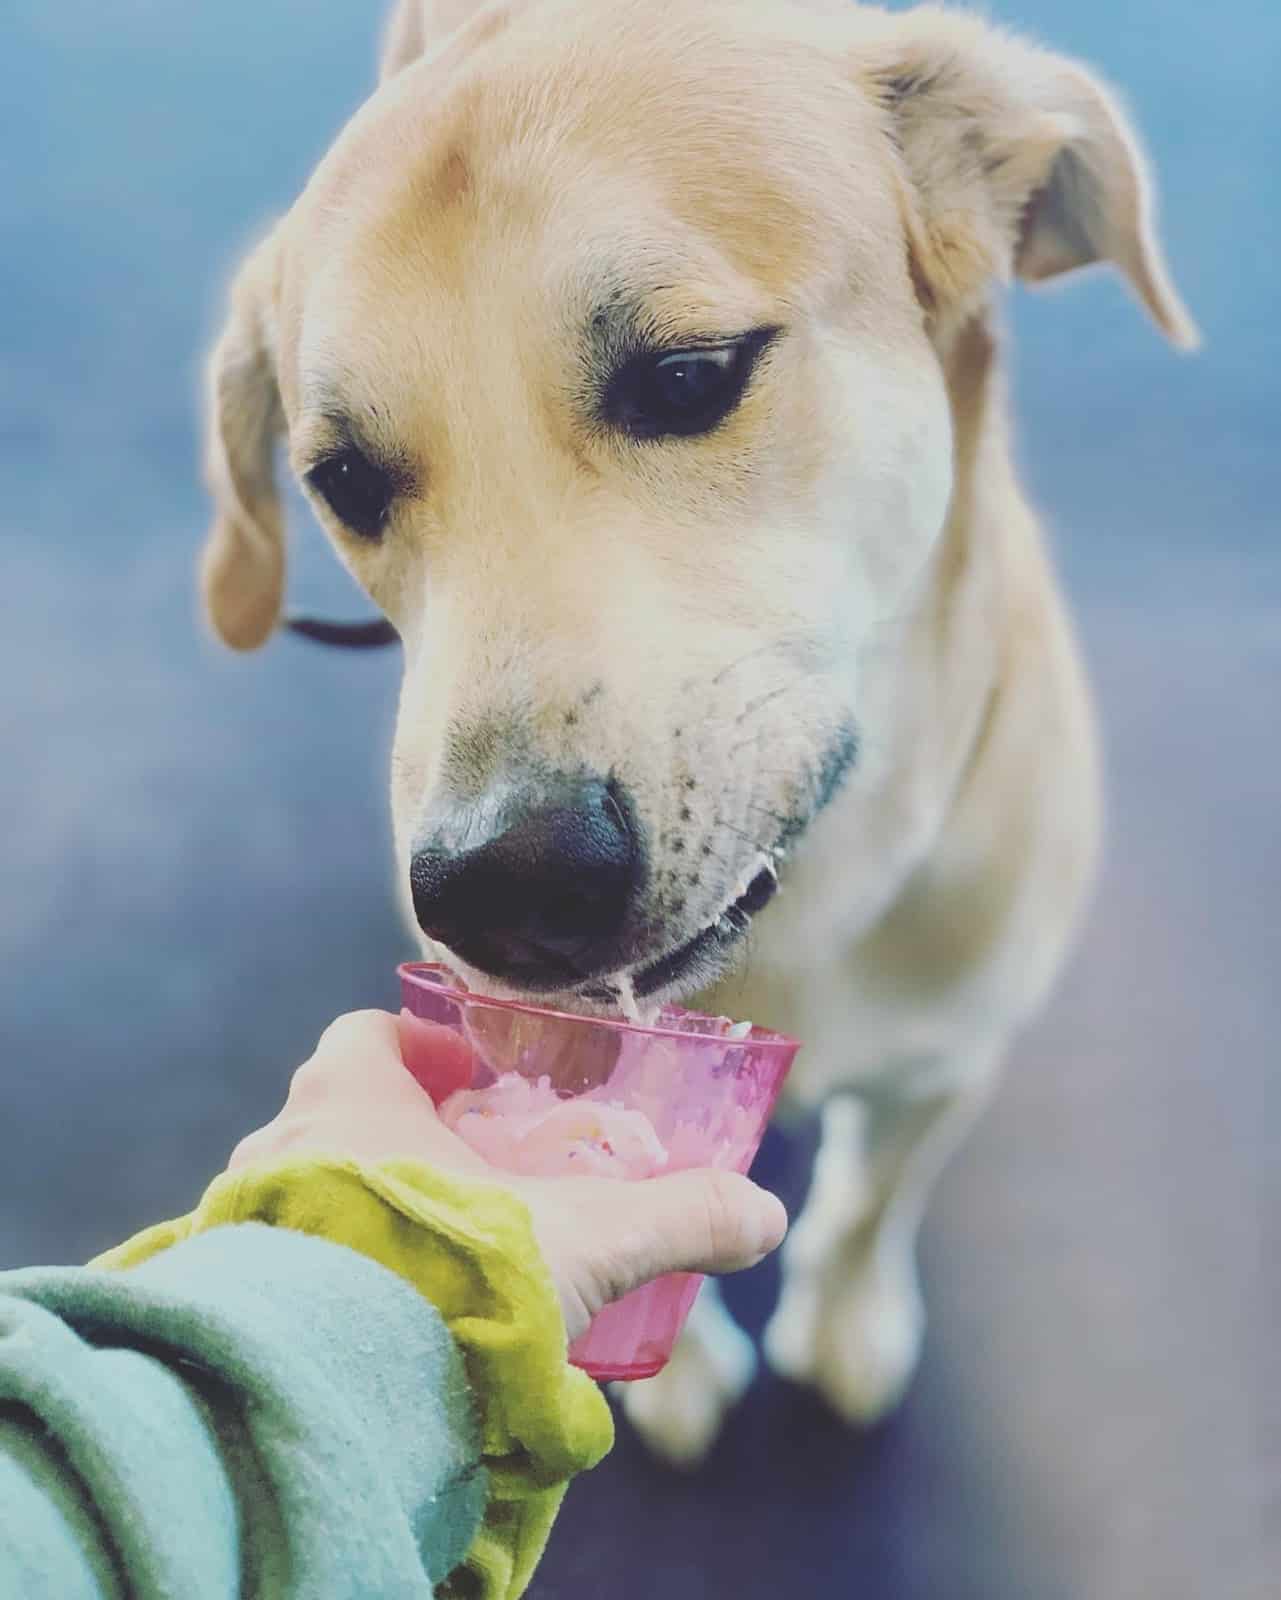 Dog eating special treat